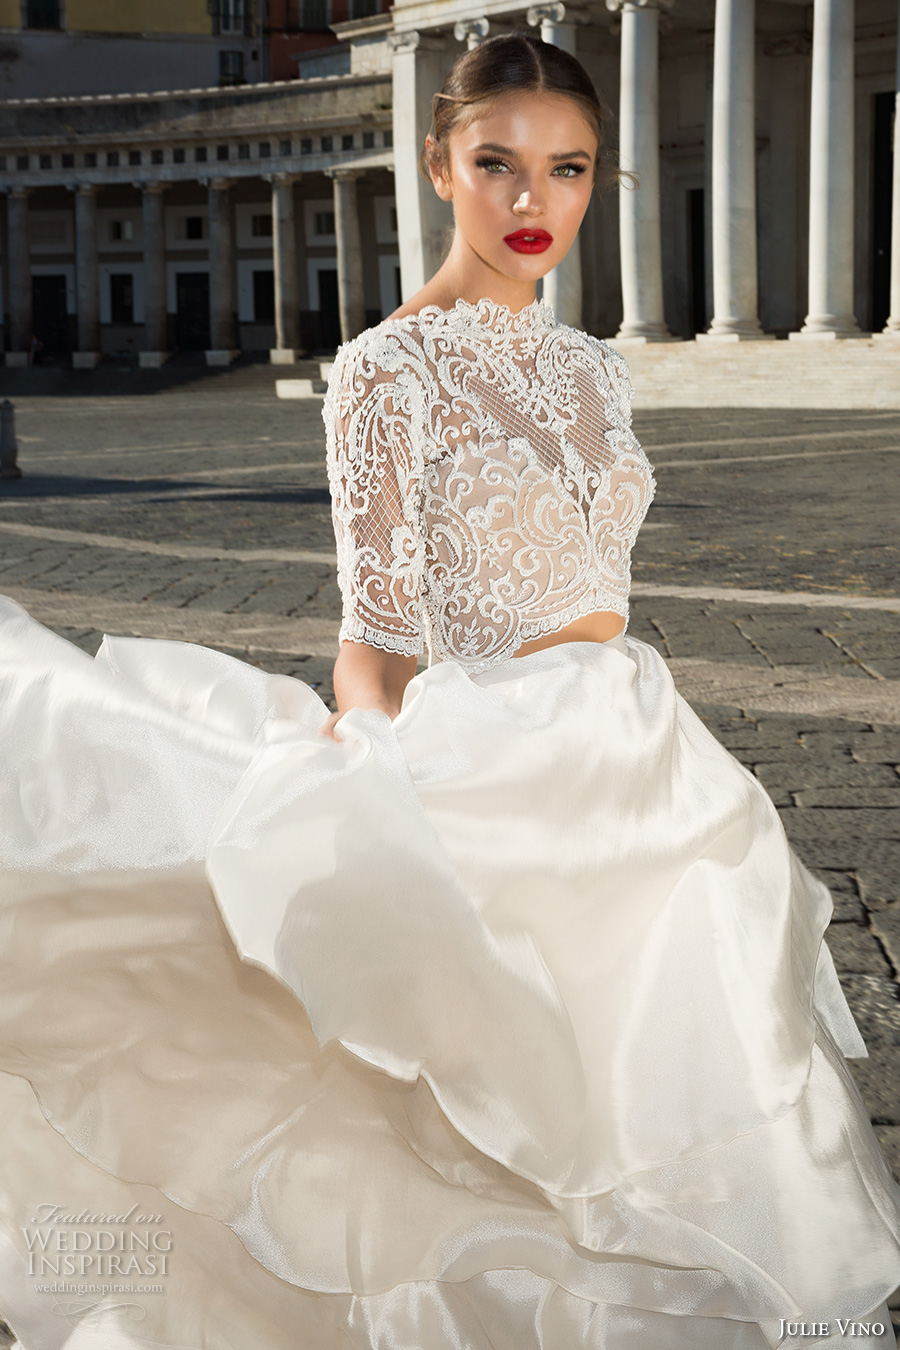 julie vino fall 2017 bridal half sleeves high neck heavily embellished bodice lace crop top princess sophiscated tiered skirt ball gown wedding dress low back chapel train (1217 1202) zv